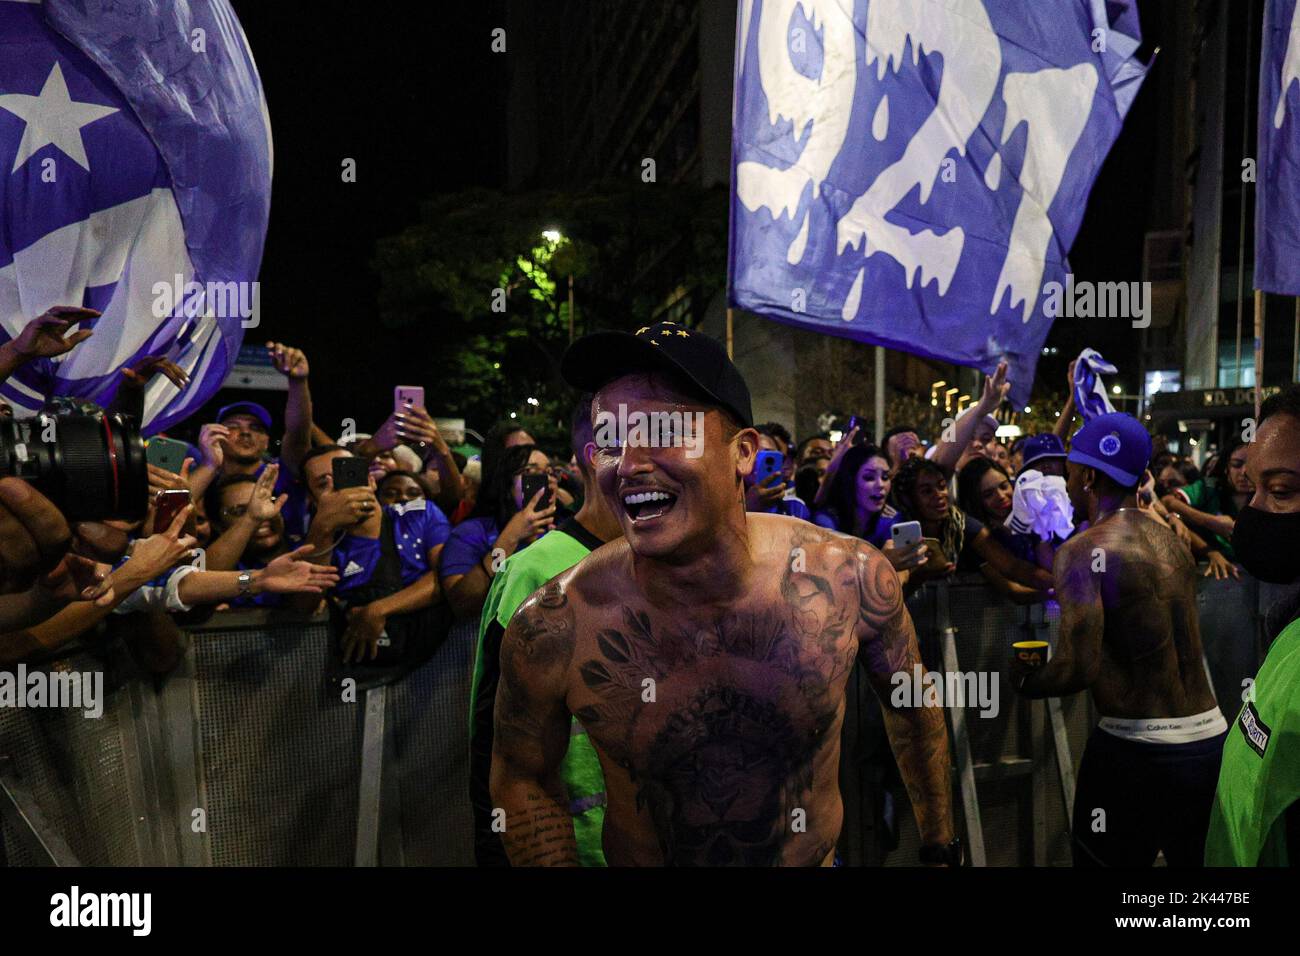 Belo Horizonte, Brazil. 30th Sep, 2022. MG - Belo Horizonte - 09/29/2022 - CRUZEIRO, CELEBRATION ACESSO SERIE A - Player Edu do Cruzeiro in square seven, downtown Belo Horizonte, during celebration of winning access to the series A by the Cruzeiro team. The team guaranteed the return to Serie A in advance after disputing the access series in the 2022 season. Photo: Gilson Junio/AGIF/Sipa USA Credit: Sipa USA/Alamy Live News Stock Photo